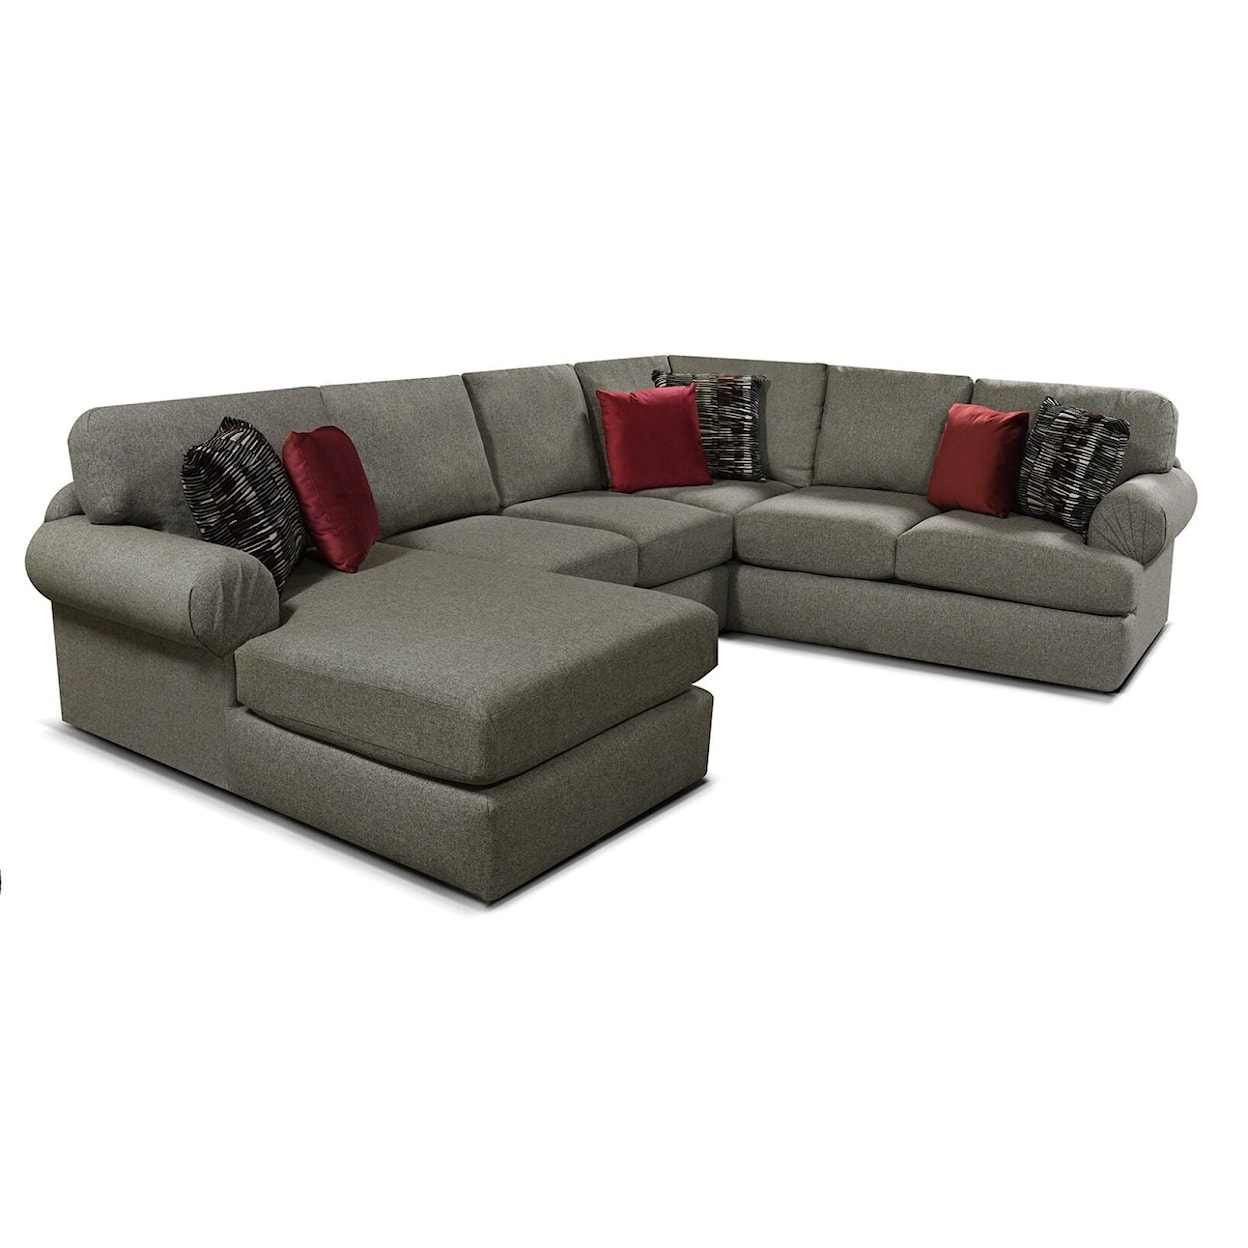 England 8250 Series 3-Piece Sectional